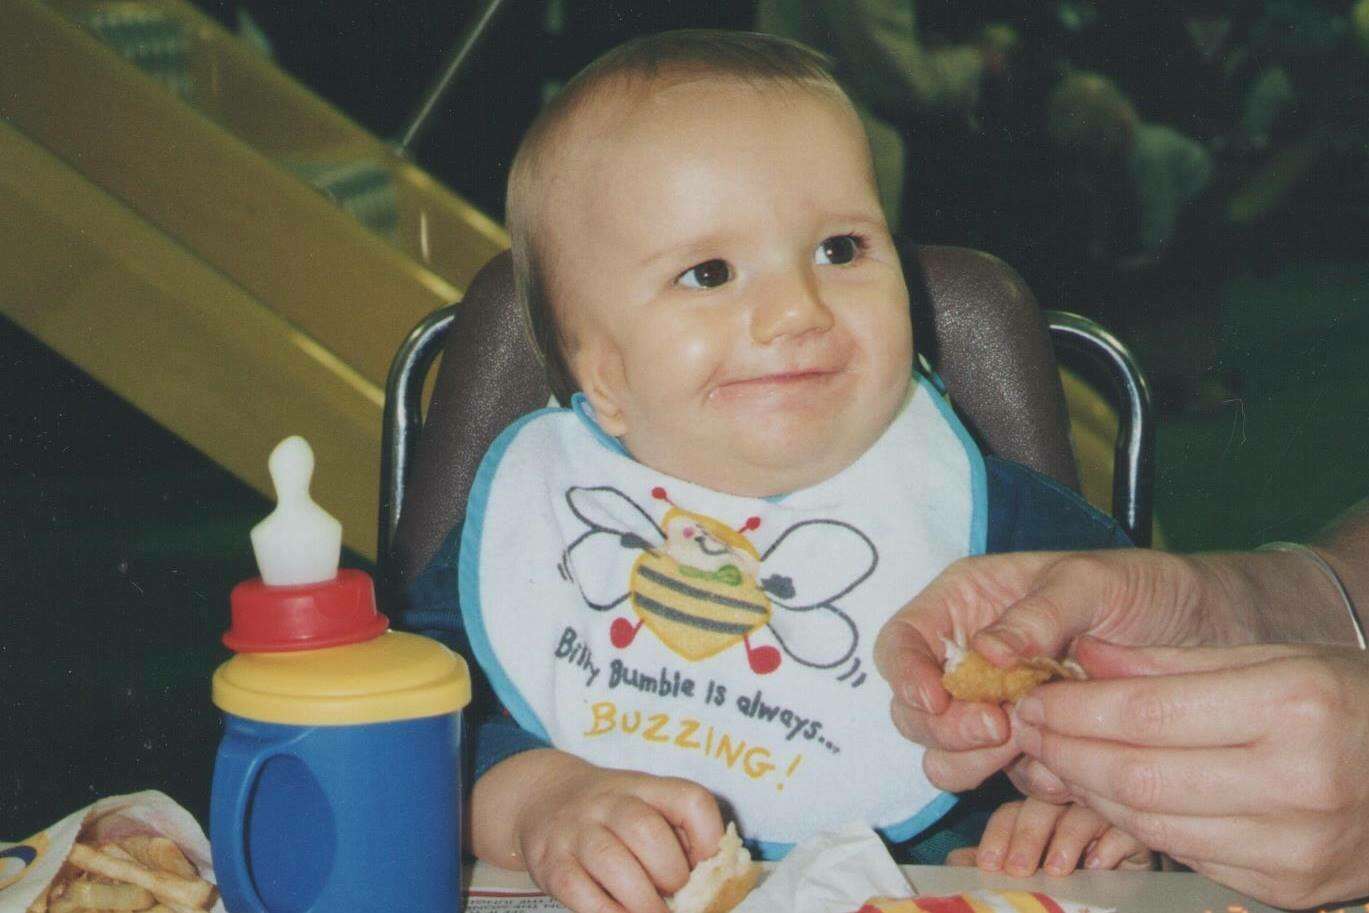 Image shows Zach when he was a baby. He is sitting in a high chair wearing a bib with a bee on it and looks up at an adult.